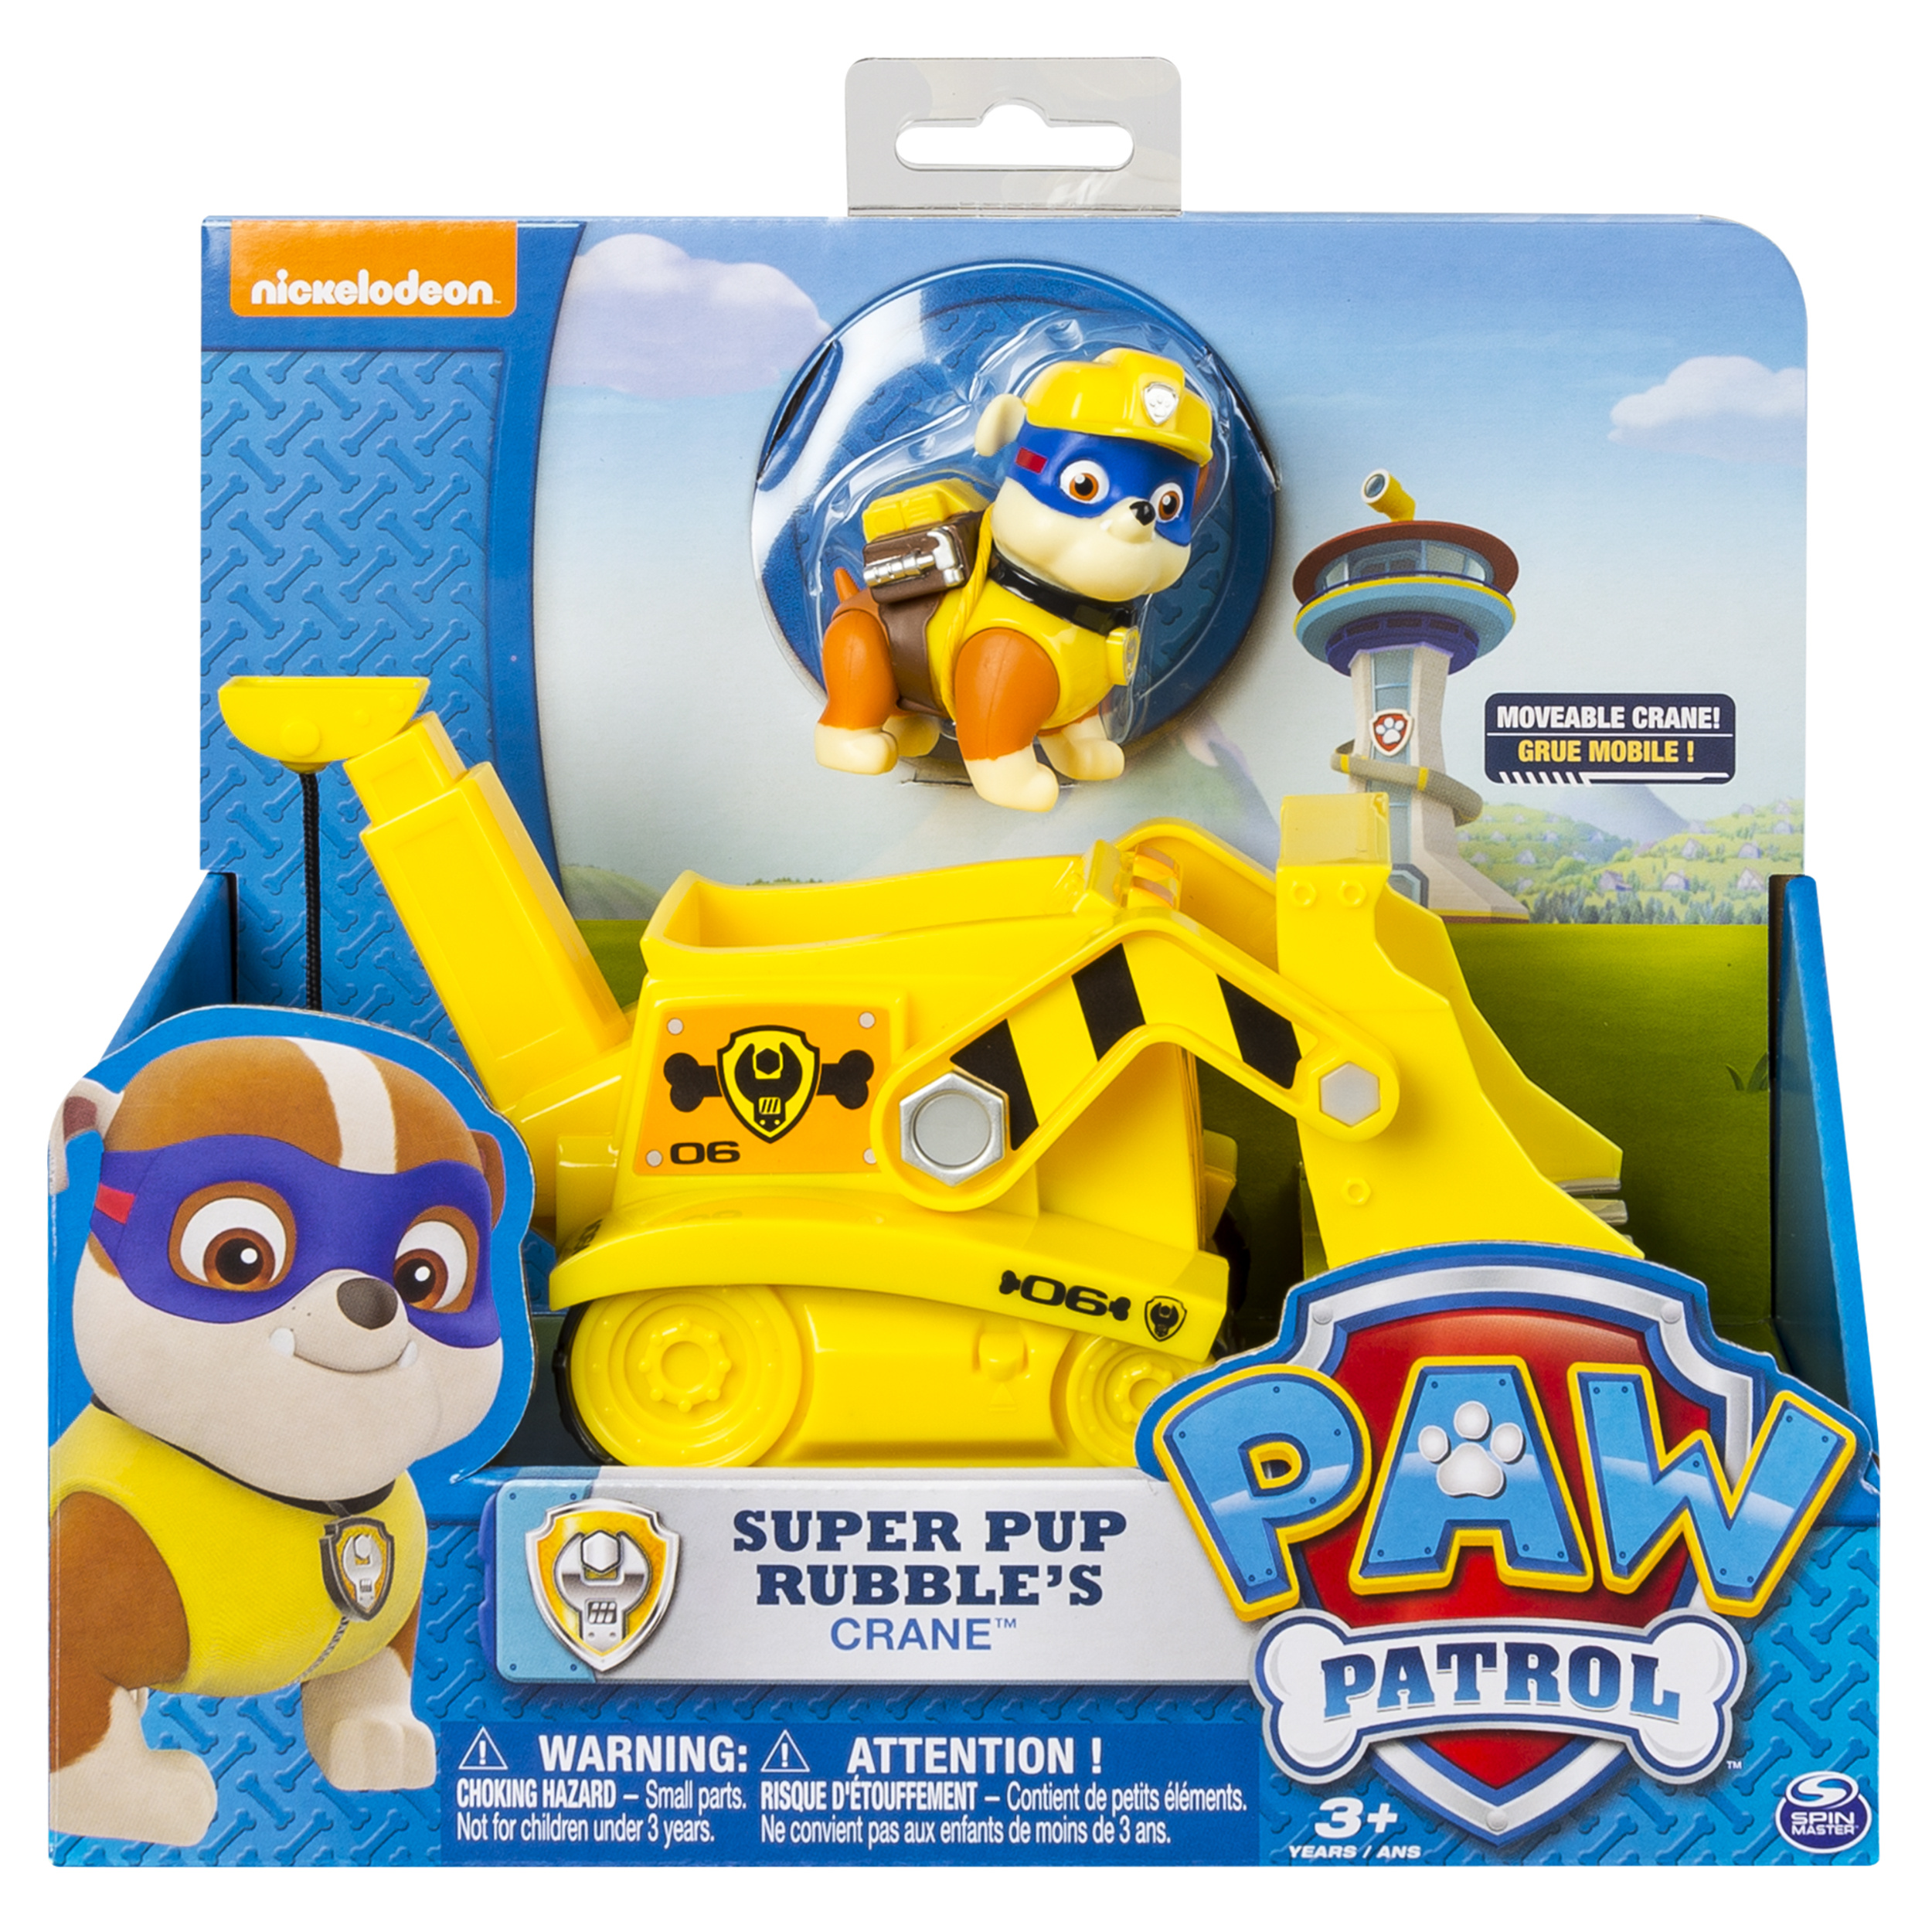 Paw Patrol Super Pup Rubble's Crane, Vehicle and Figure - image 5 of 6